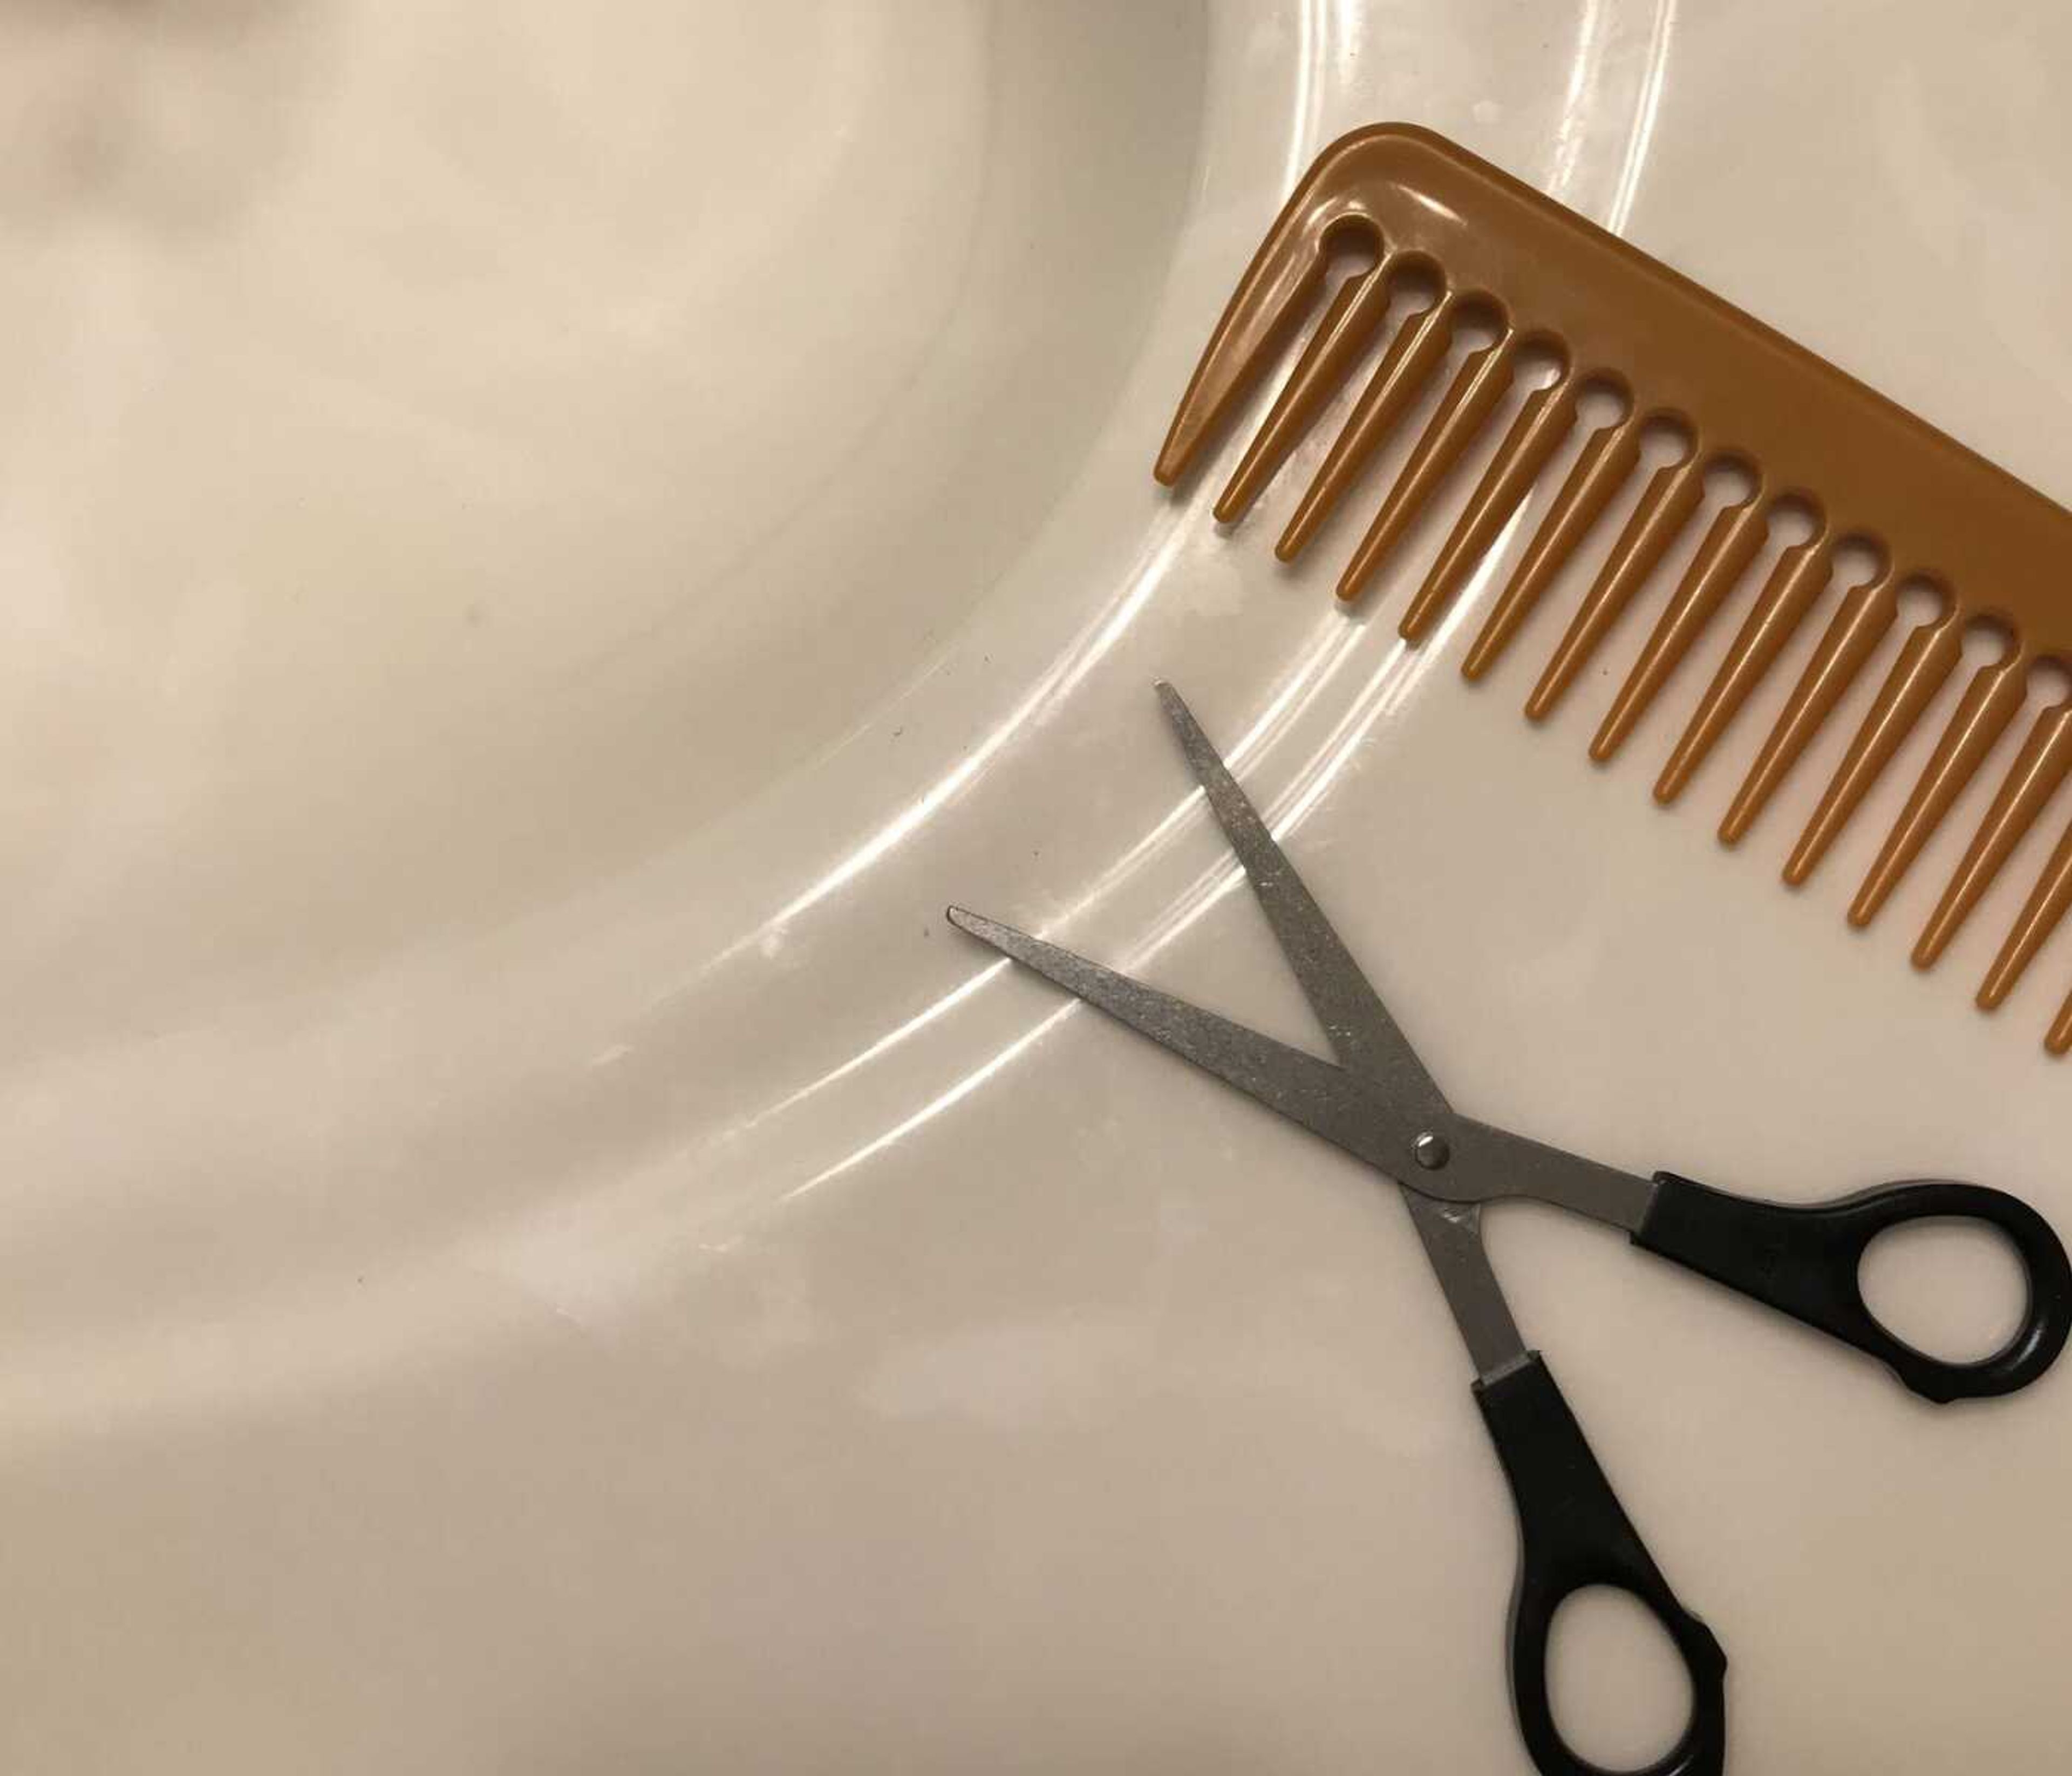 Put down the scissors! Don’t touch your hair during quarantine until you read these tips from stylists!